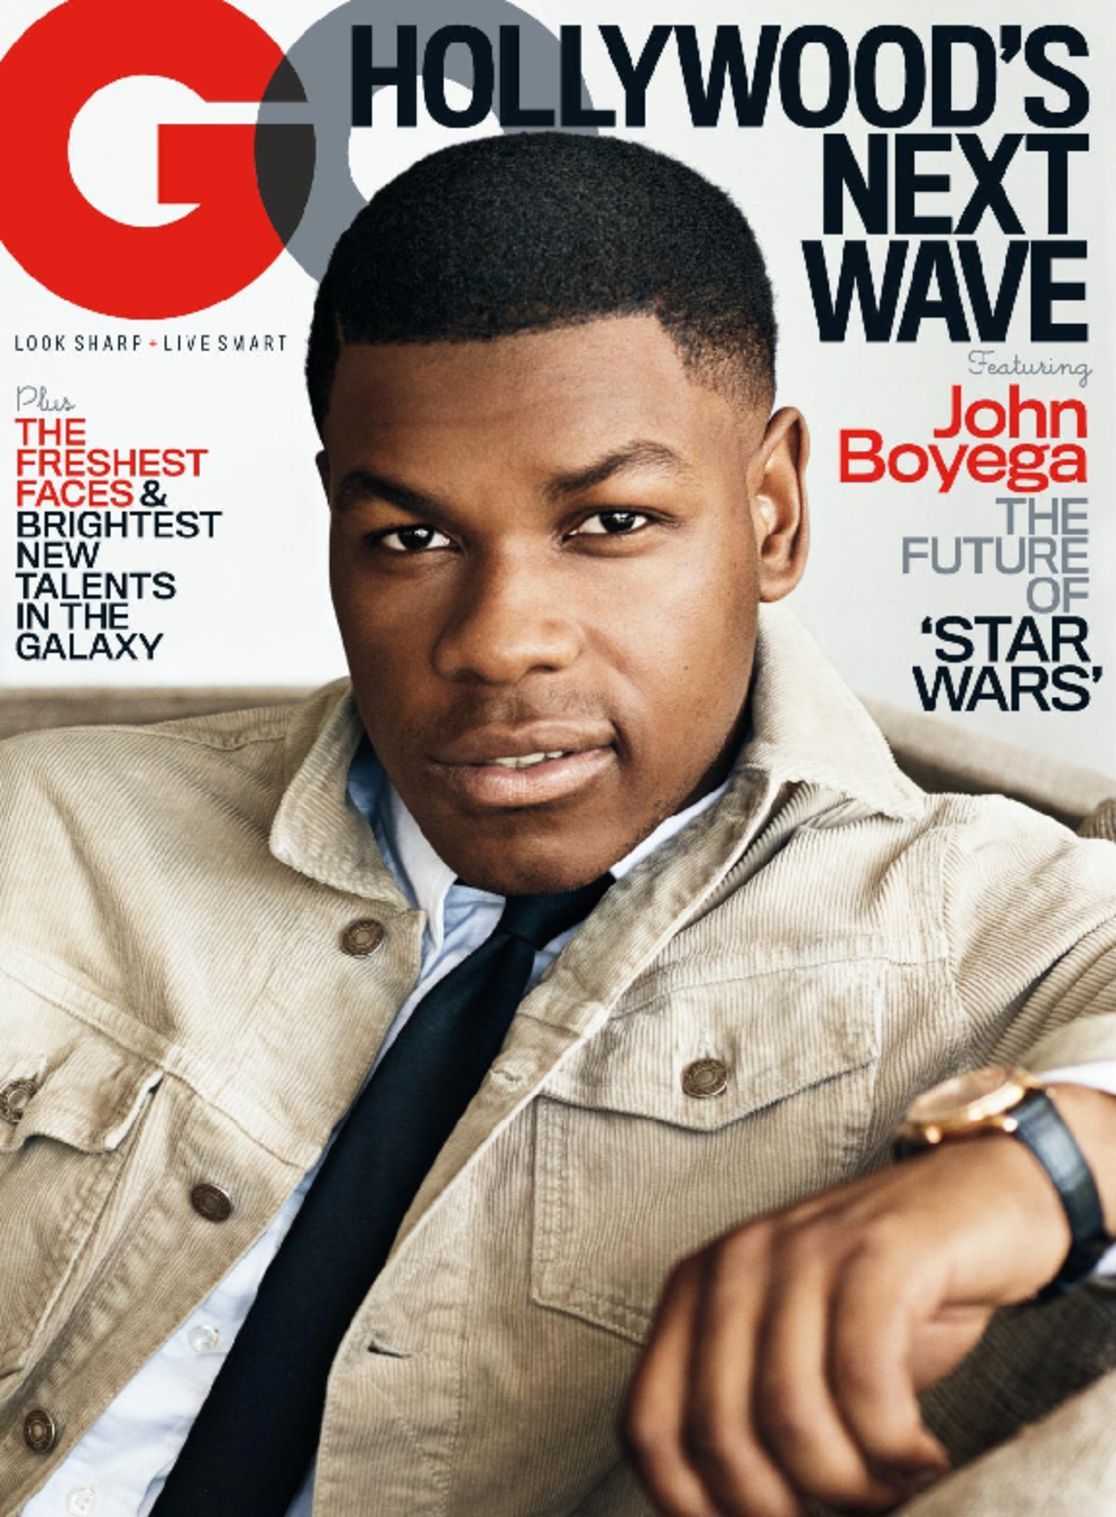 GQ Magazine February 2017 cover and contents | British GQ